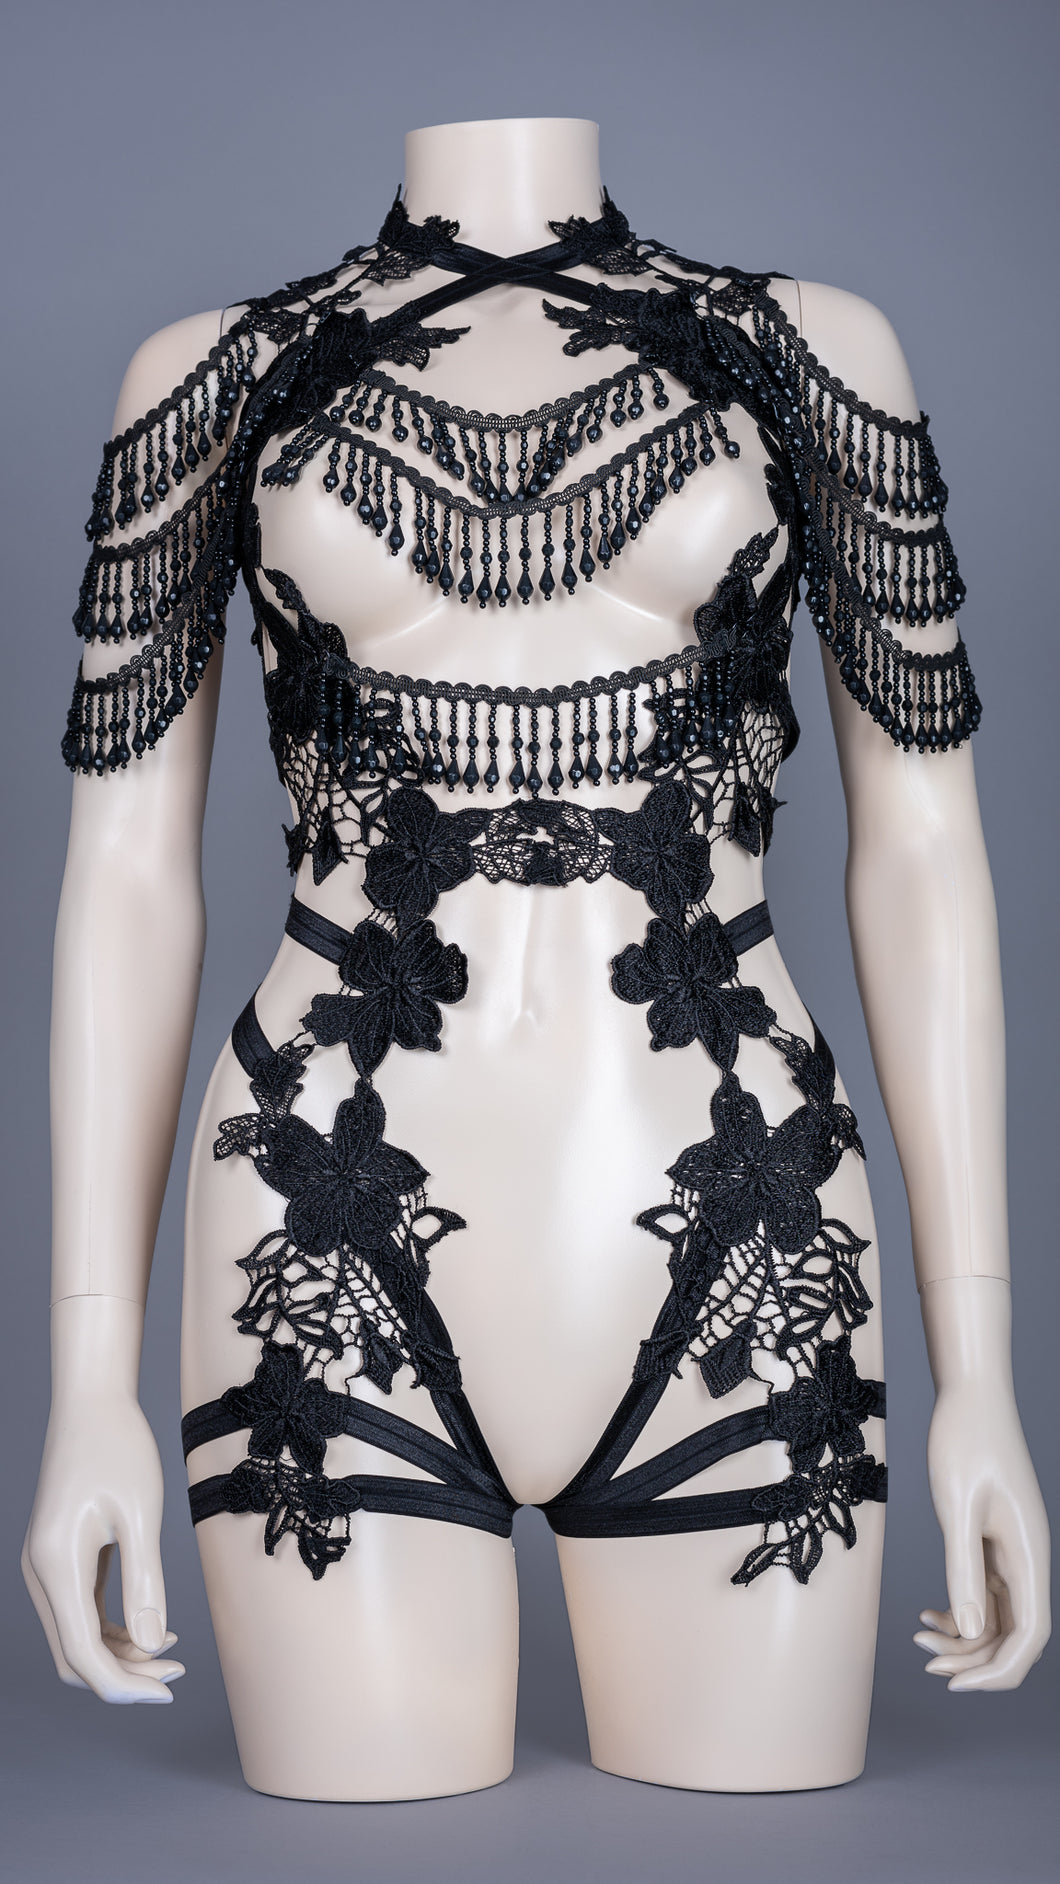 NARCOTIQUE - Luxe Black Lace Beaded Fringe Bodycage